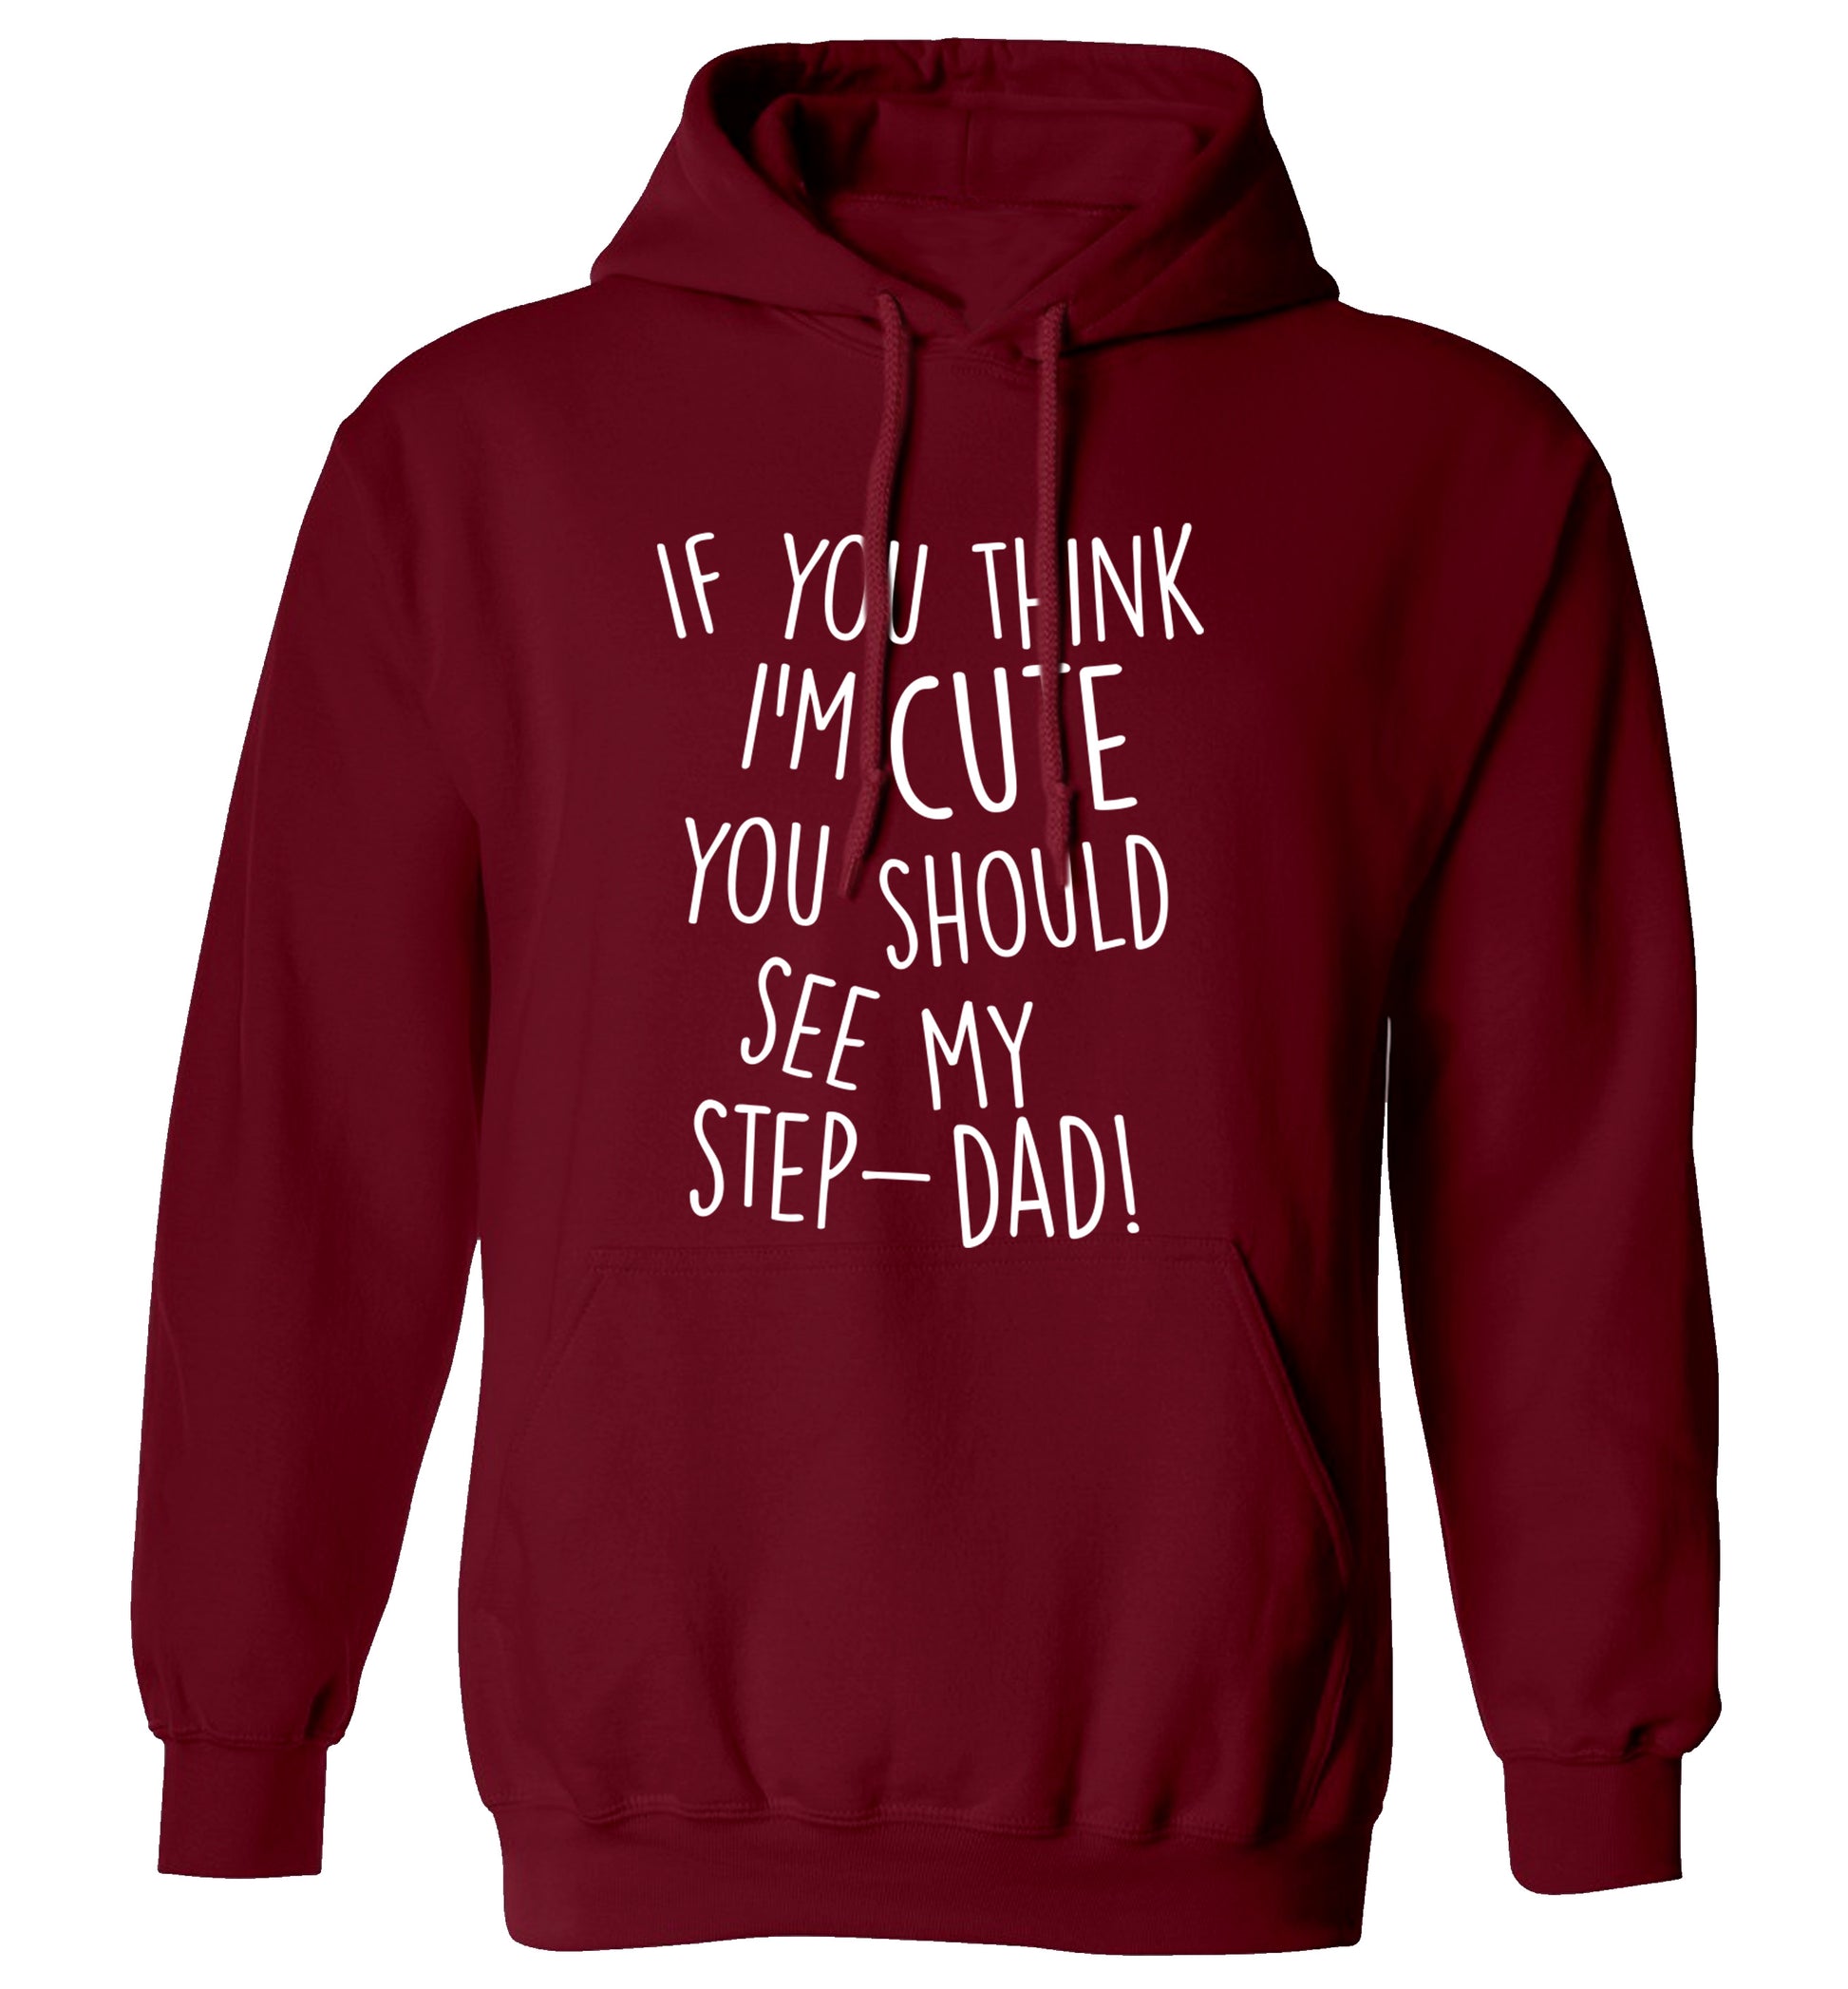 If you think I'm cute you should see my step-dad adults unisex maroon hoodie 2XL